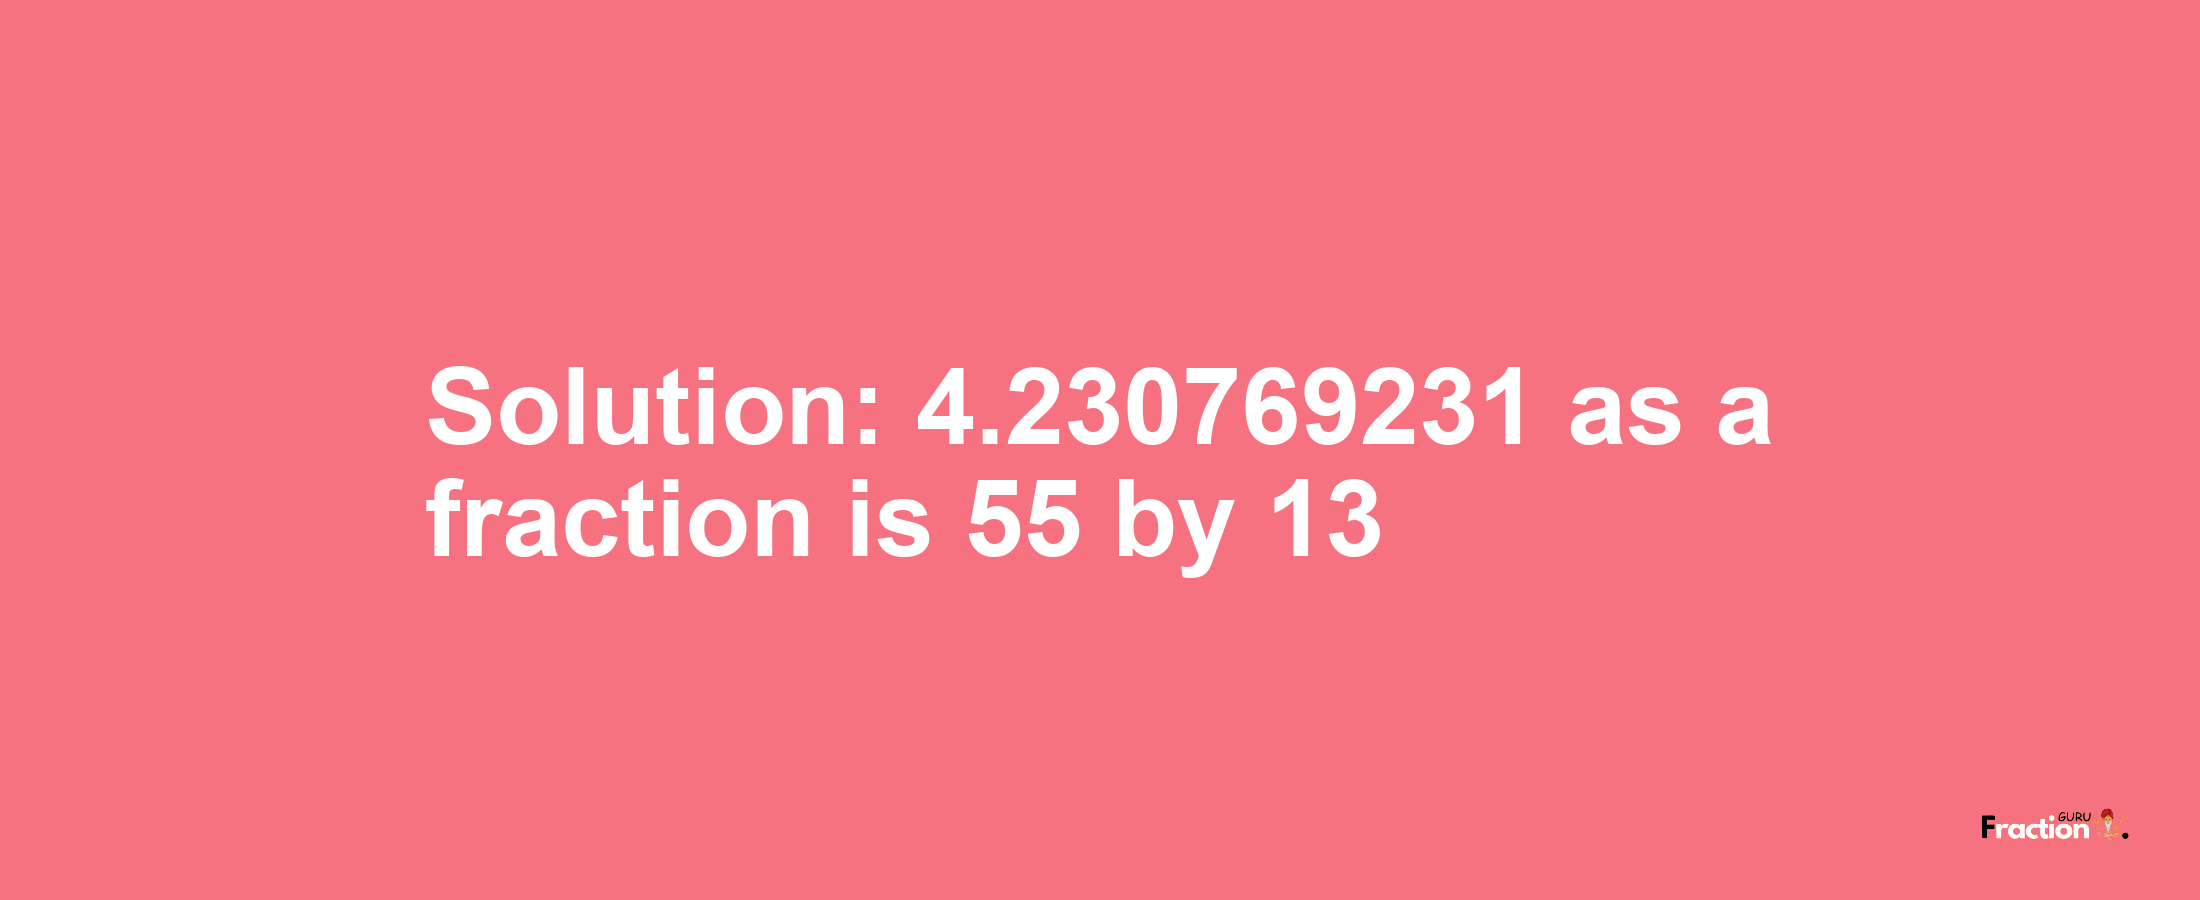 Solution:4.230769231 as a fraction is 55/13